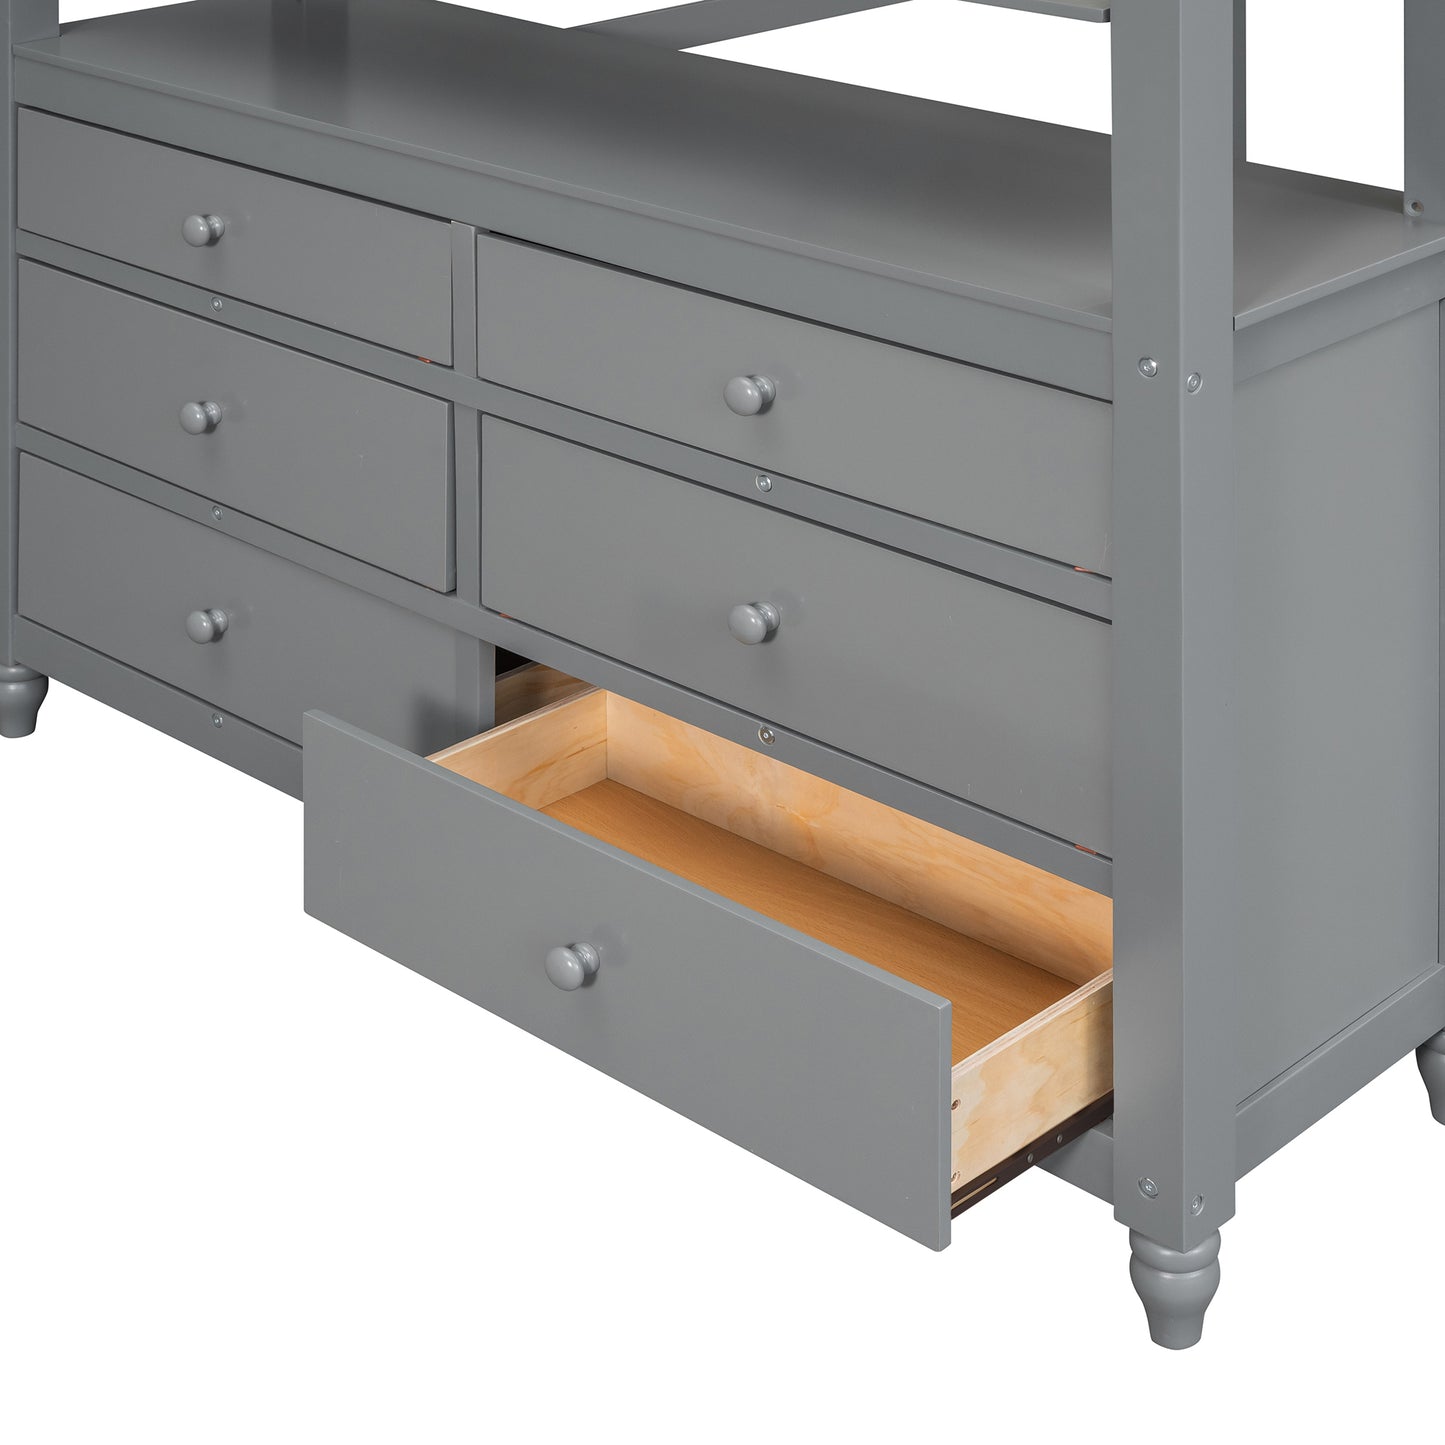 Full size Loft Bed with Drawers and Desk, Wooden Loft Bed with Shelves - Gray